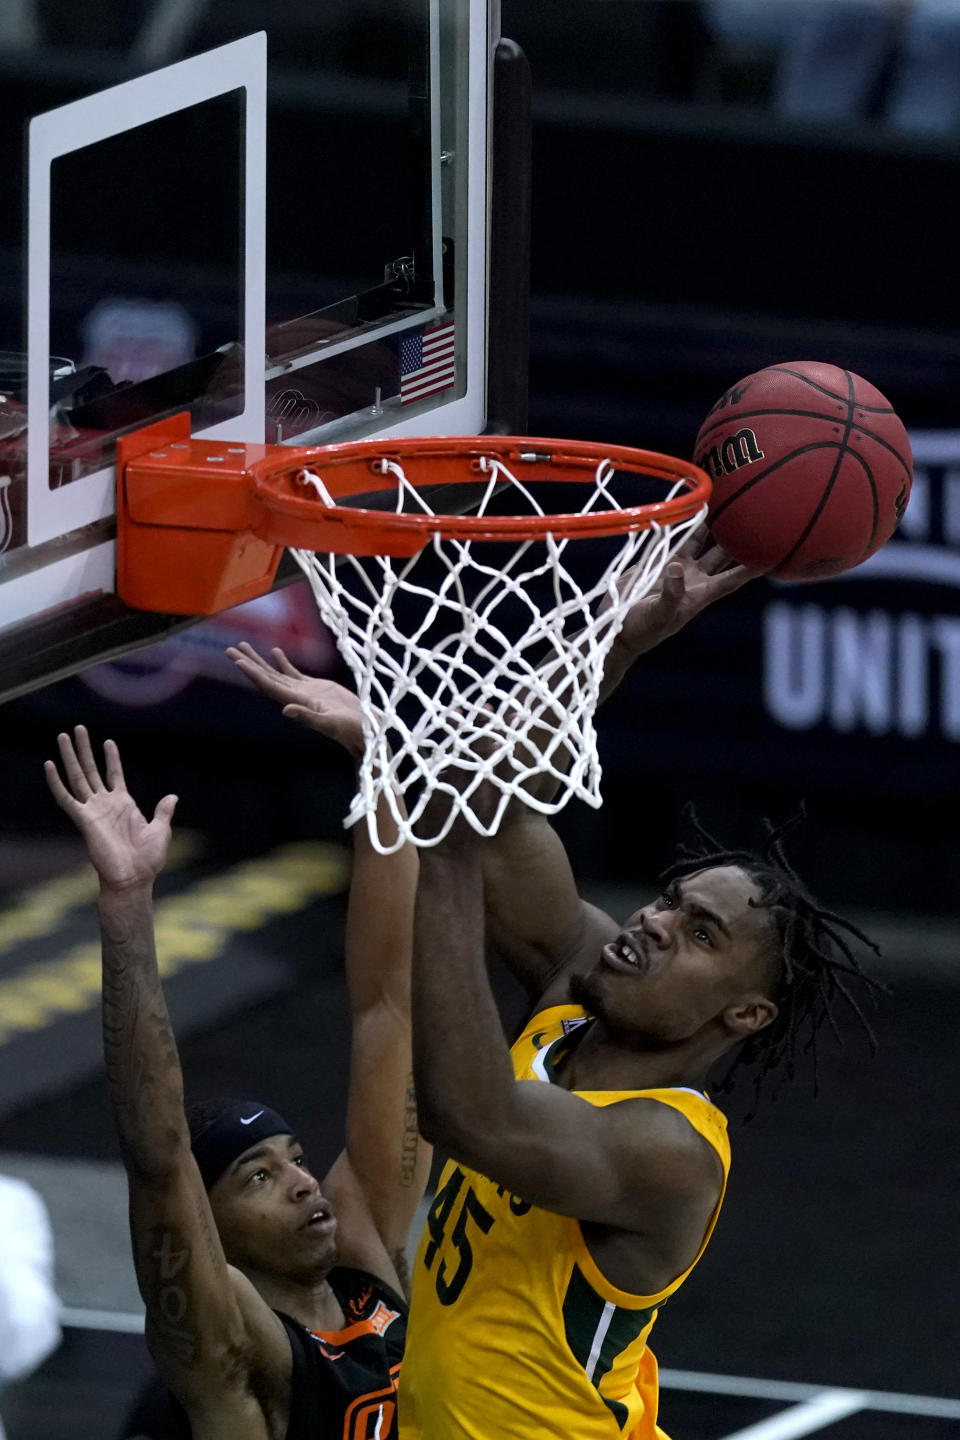 Baylor's Davion Mitchell (45) shoots over Oklahoma State's Avery Anderson III during the first half of an NCAA college basketball game in the semifinals of the Big 12 tournament in Kansas City, Mo., Friday, March 12, 2021. (AP Photo/Charlie Riedel)